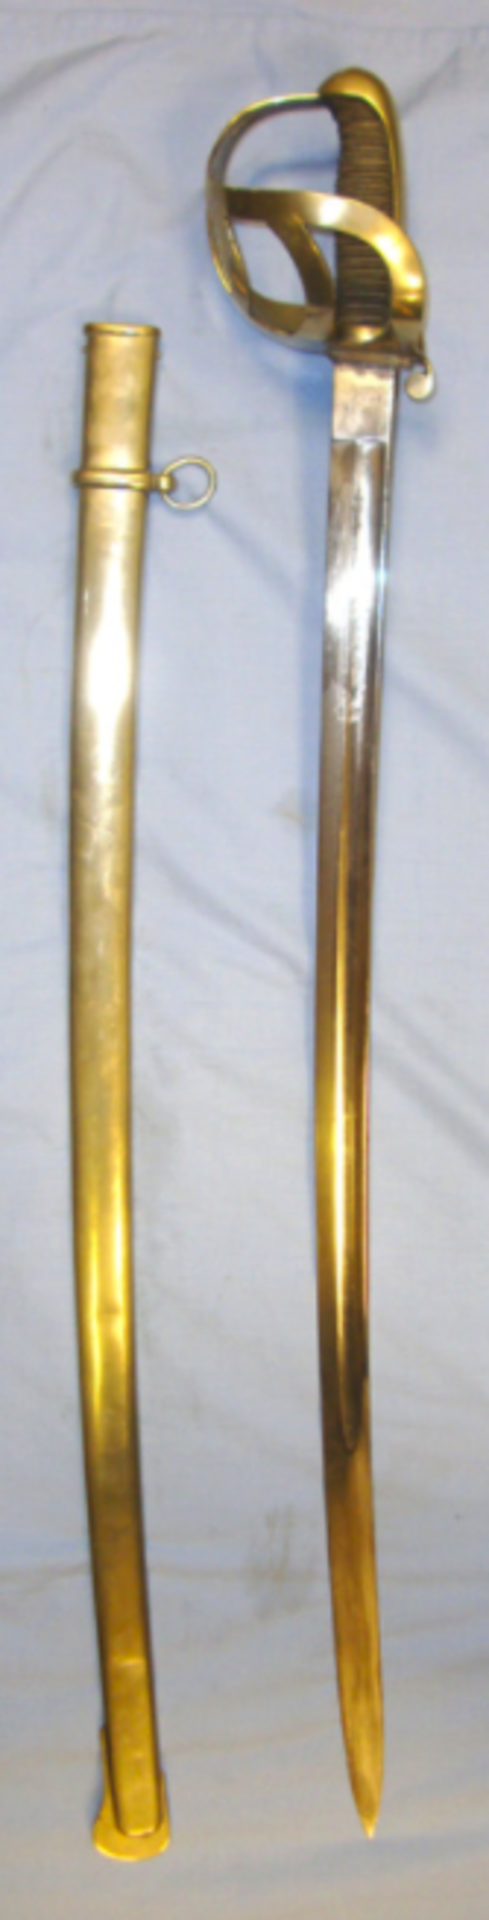 German Heavy Cavalry Sabre Etched 'Aug. Savelkoul Batavia' & Scabbard   This is a nice German